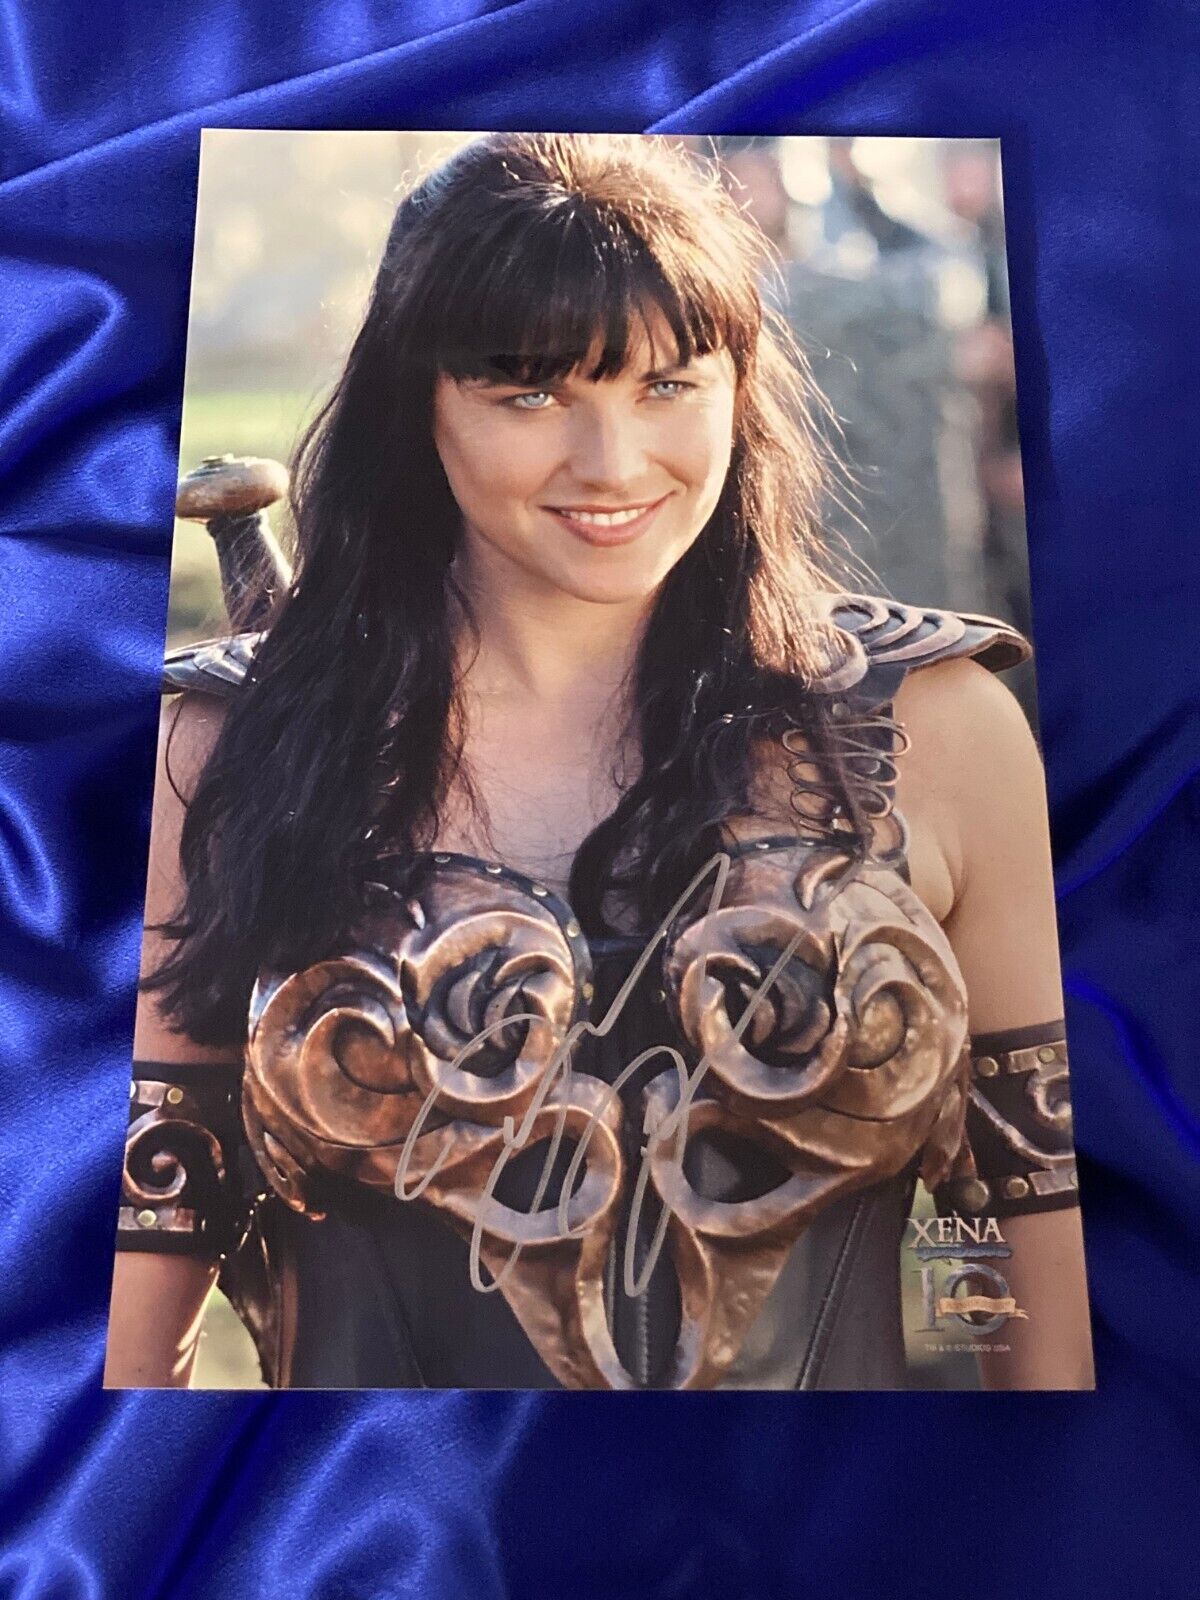 Super Rare Official Xena 15x10 Signed Photo With Coa - Lucy Lawless Xe-bgll 217